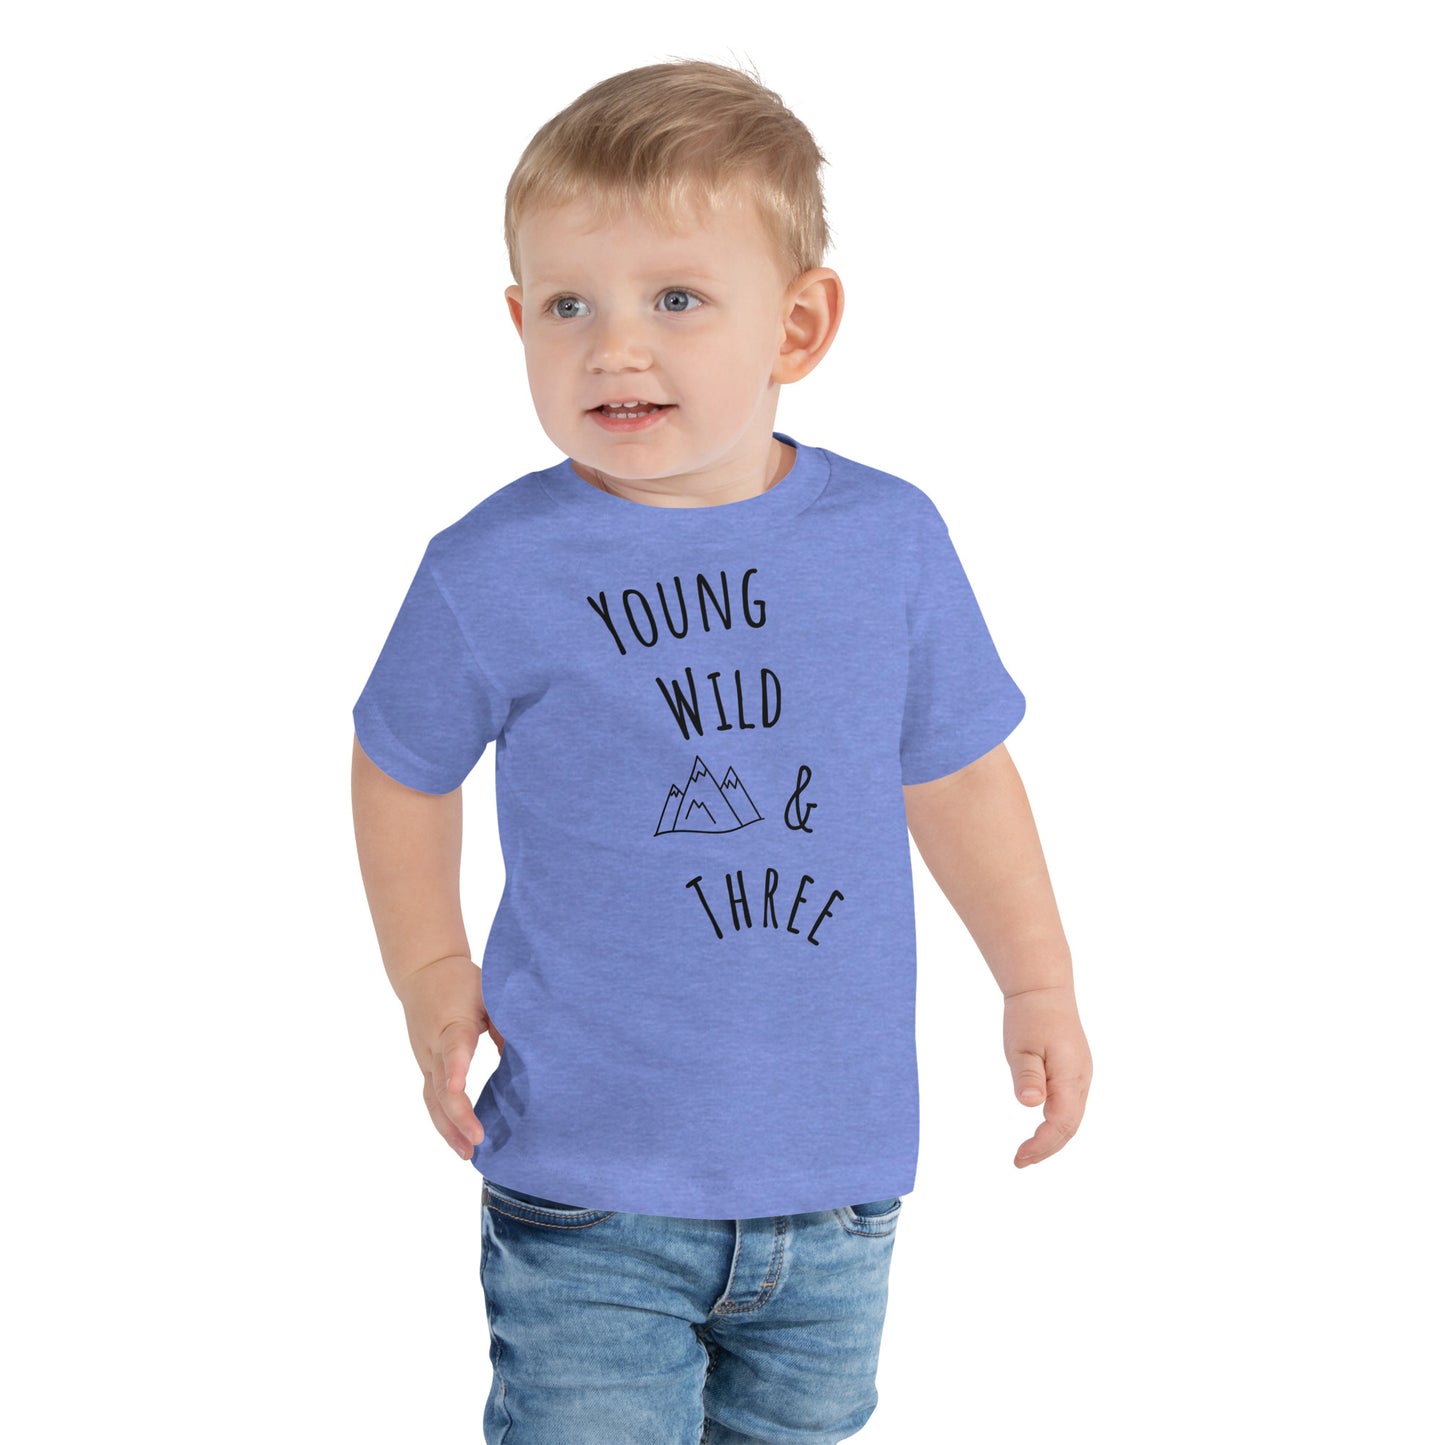 Toddler Short Sleeve Tee - Young, wild and three W/B